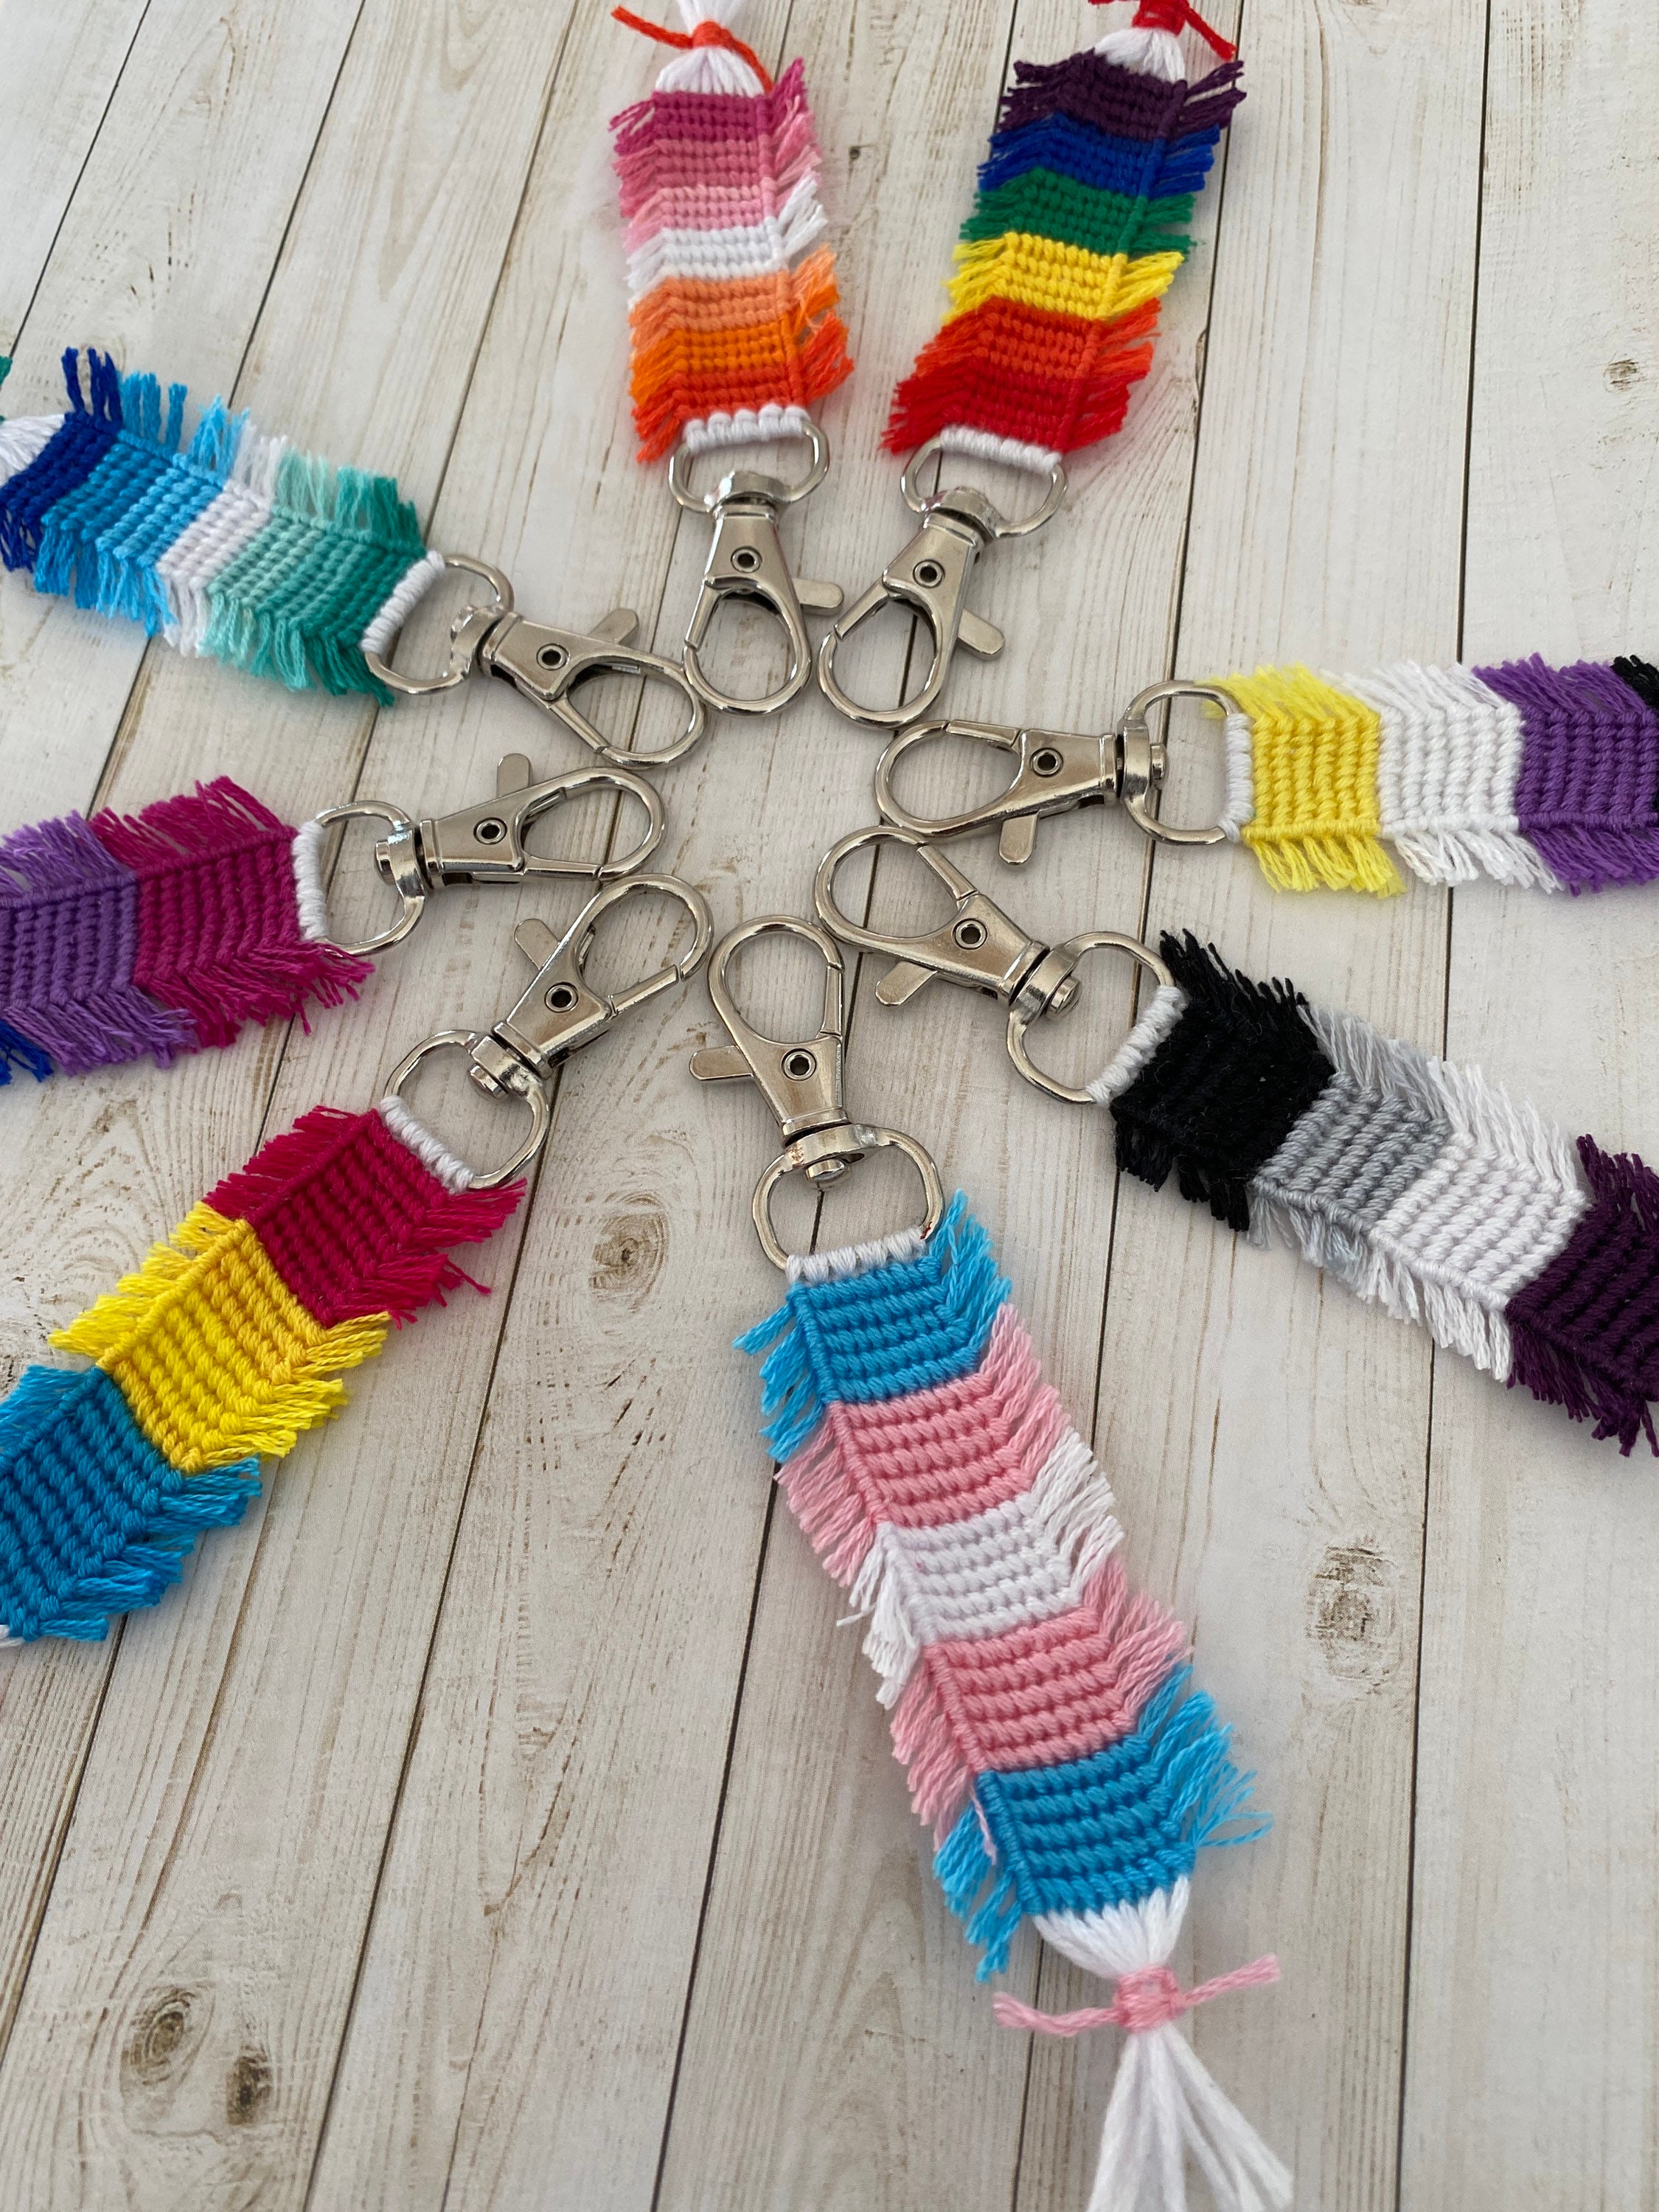 Keychains and Wristlet Straps - Pride Flags and Fun Designs — Cybermenology  - Handmade Goods and Other Nerdy Things